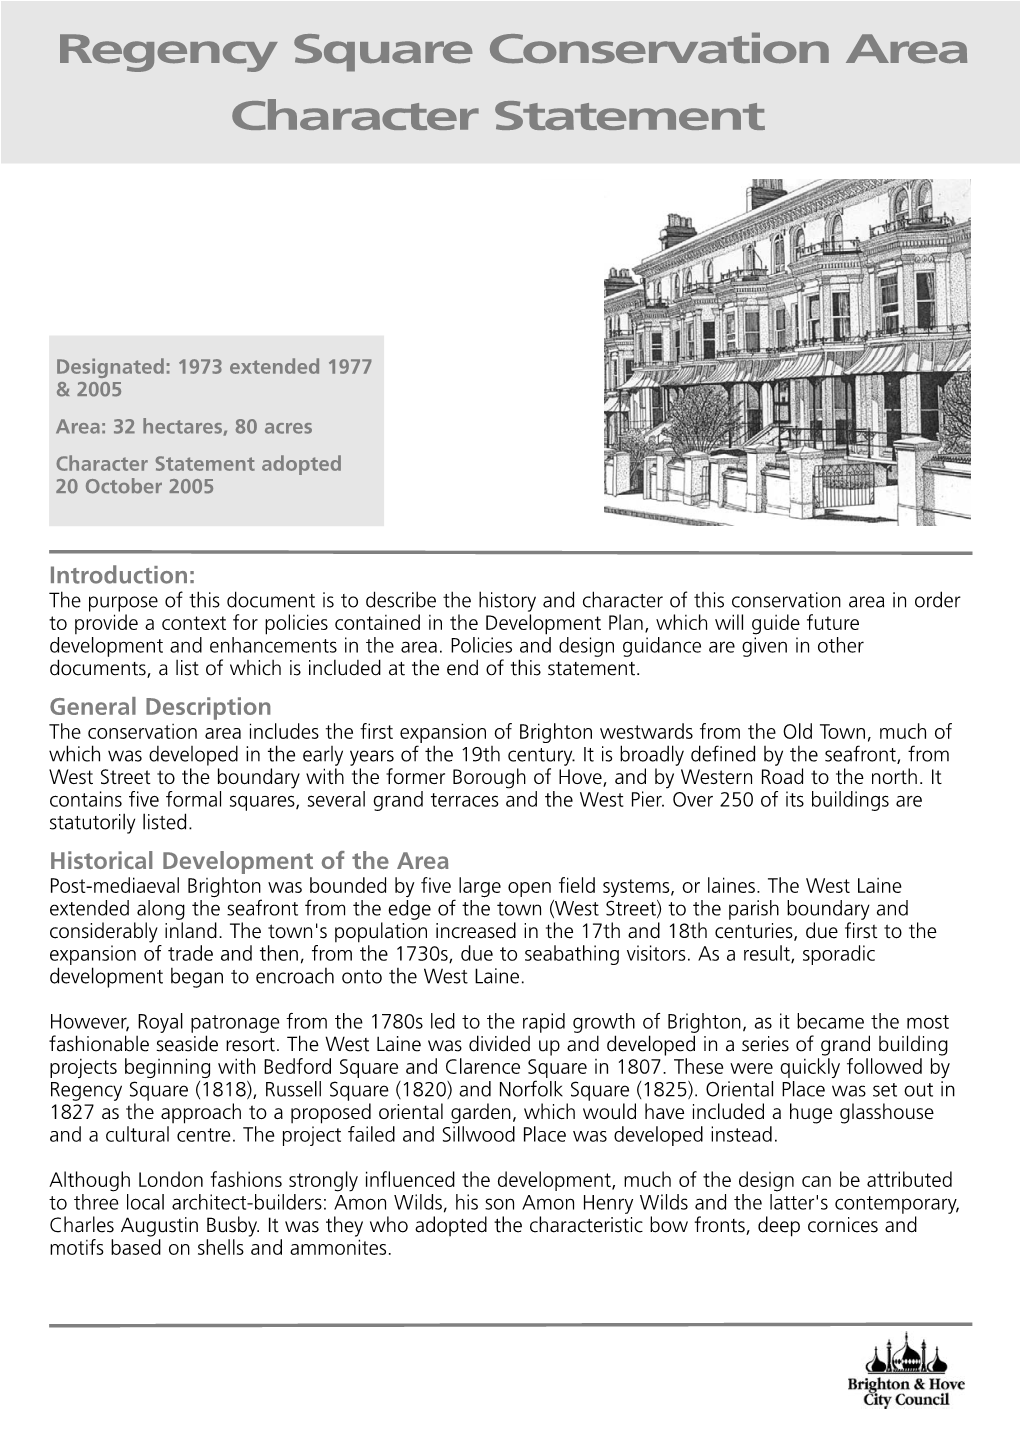 Regency Square Conservation Area Character Statement